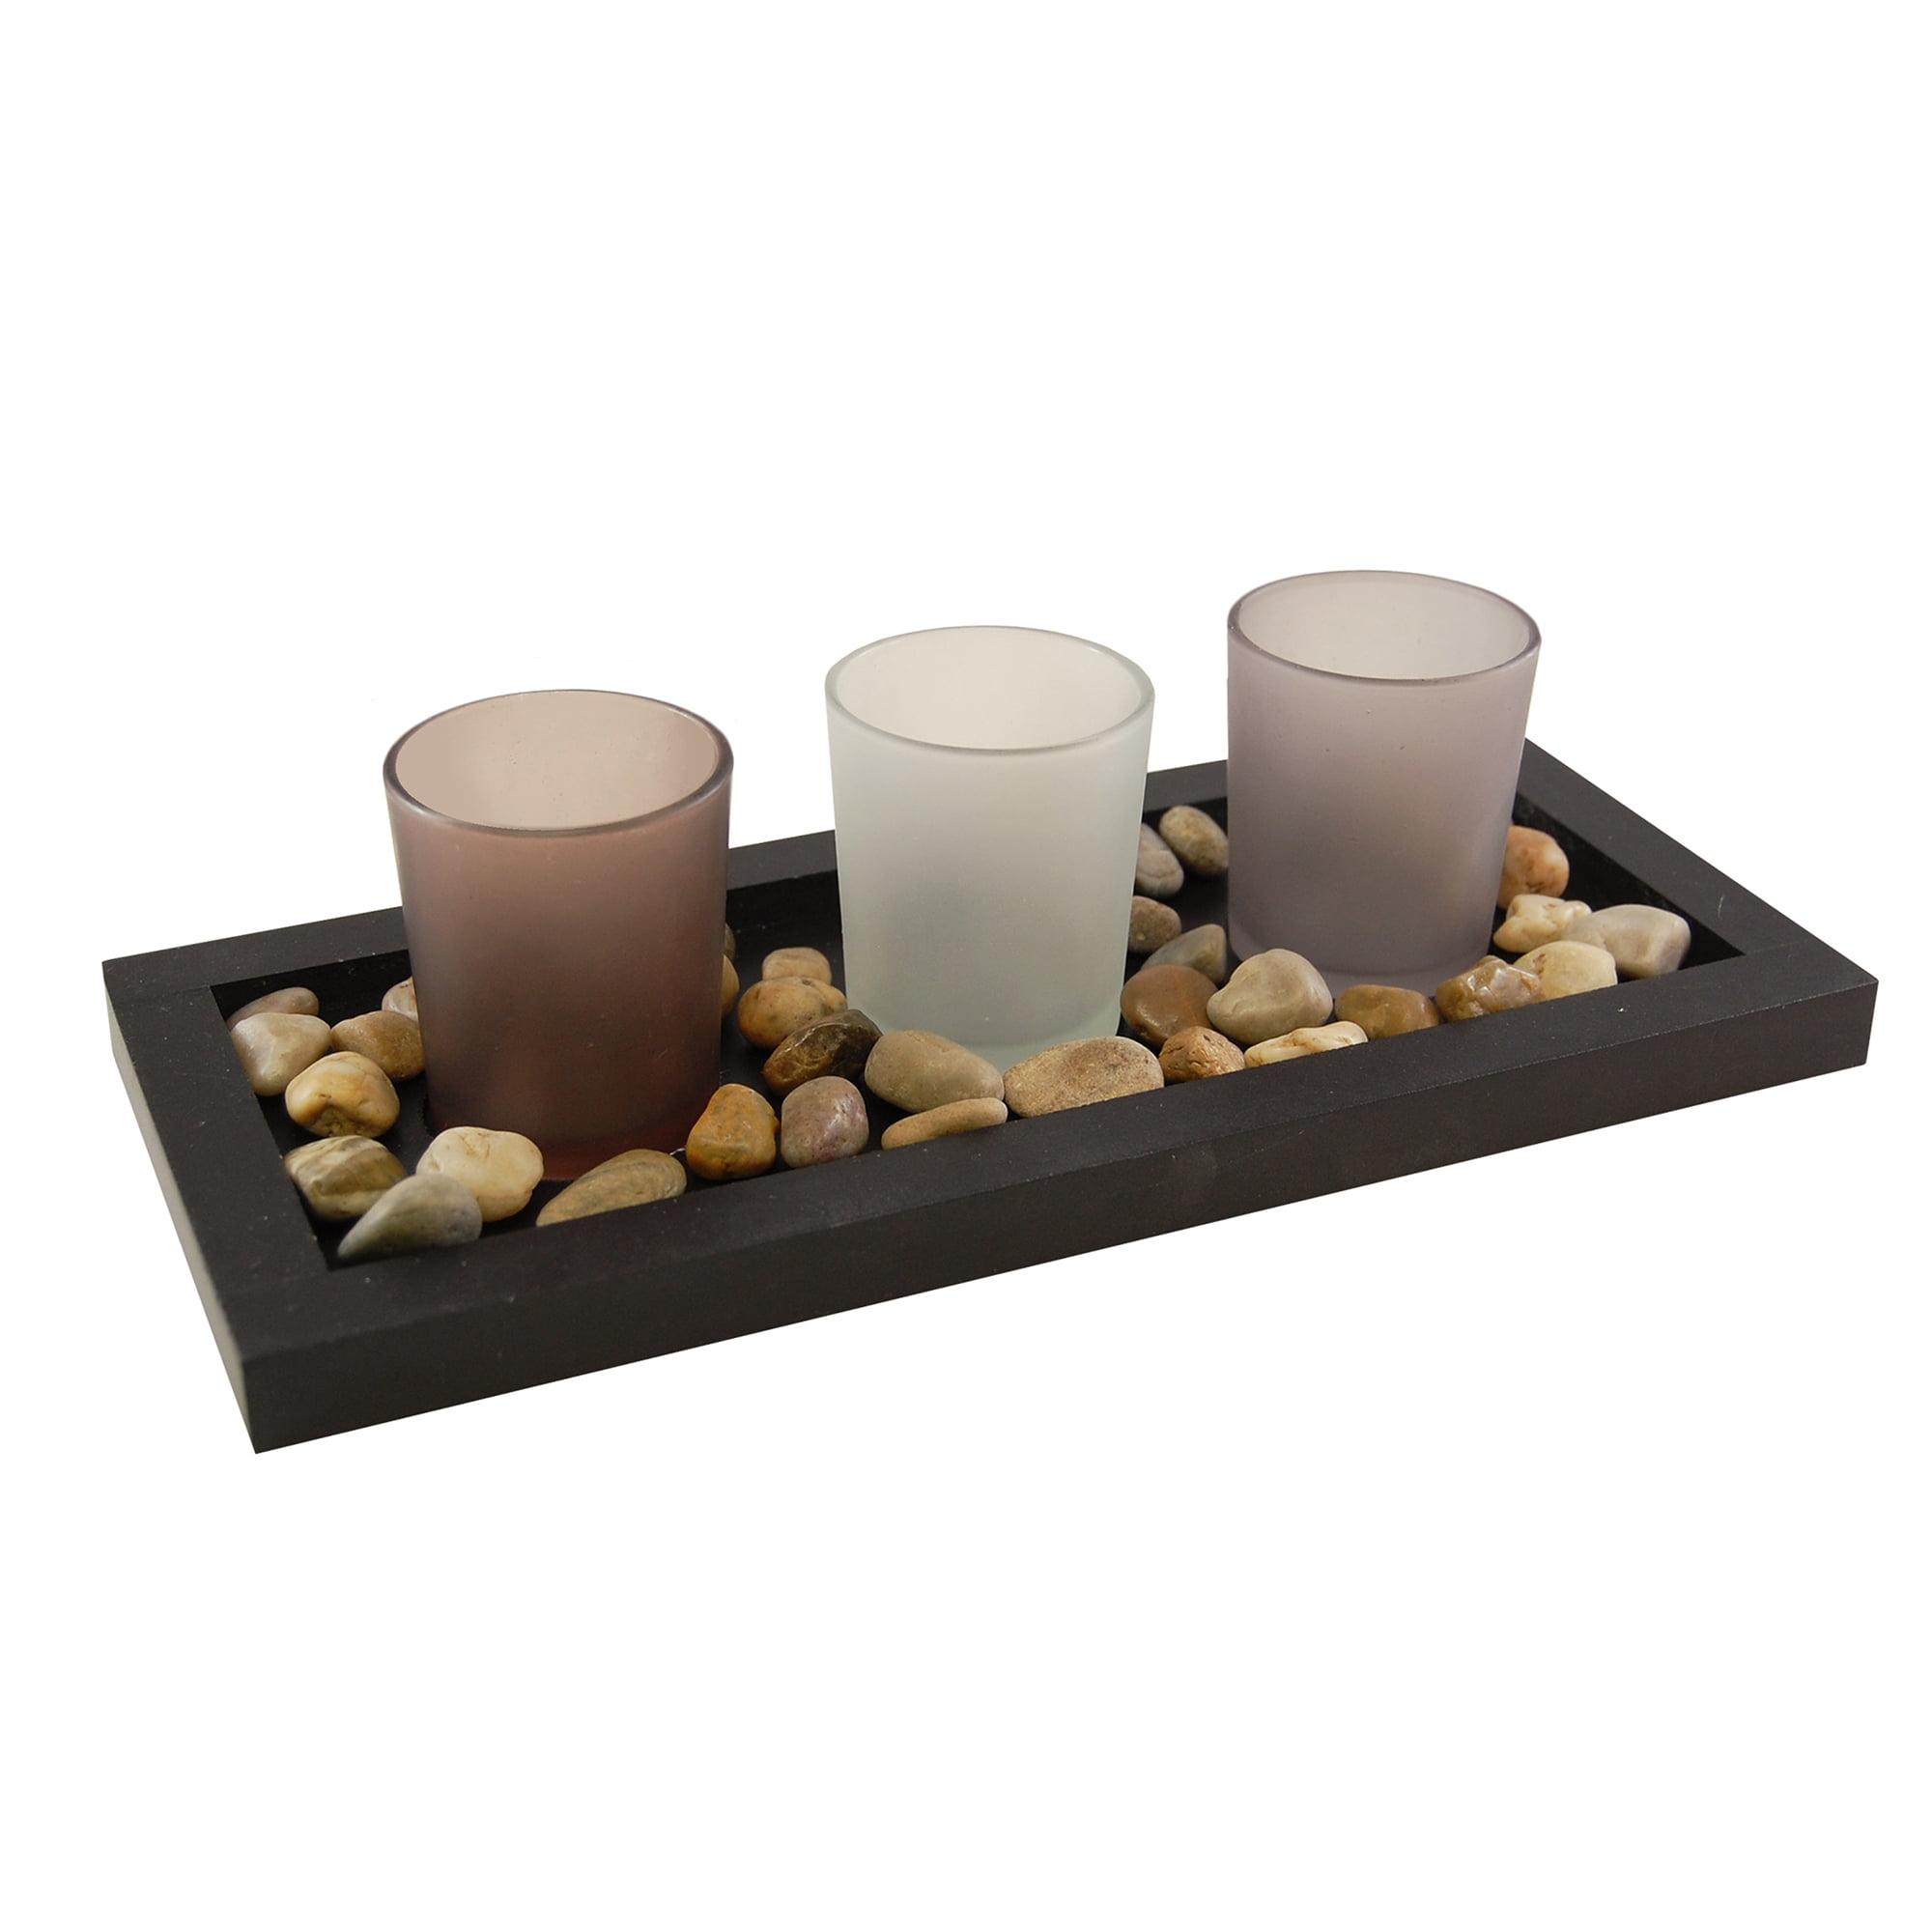 Warm Soft Black Wooden Tray with Earth-Tone Frosted Glass Candleholders